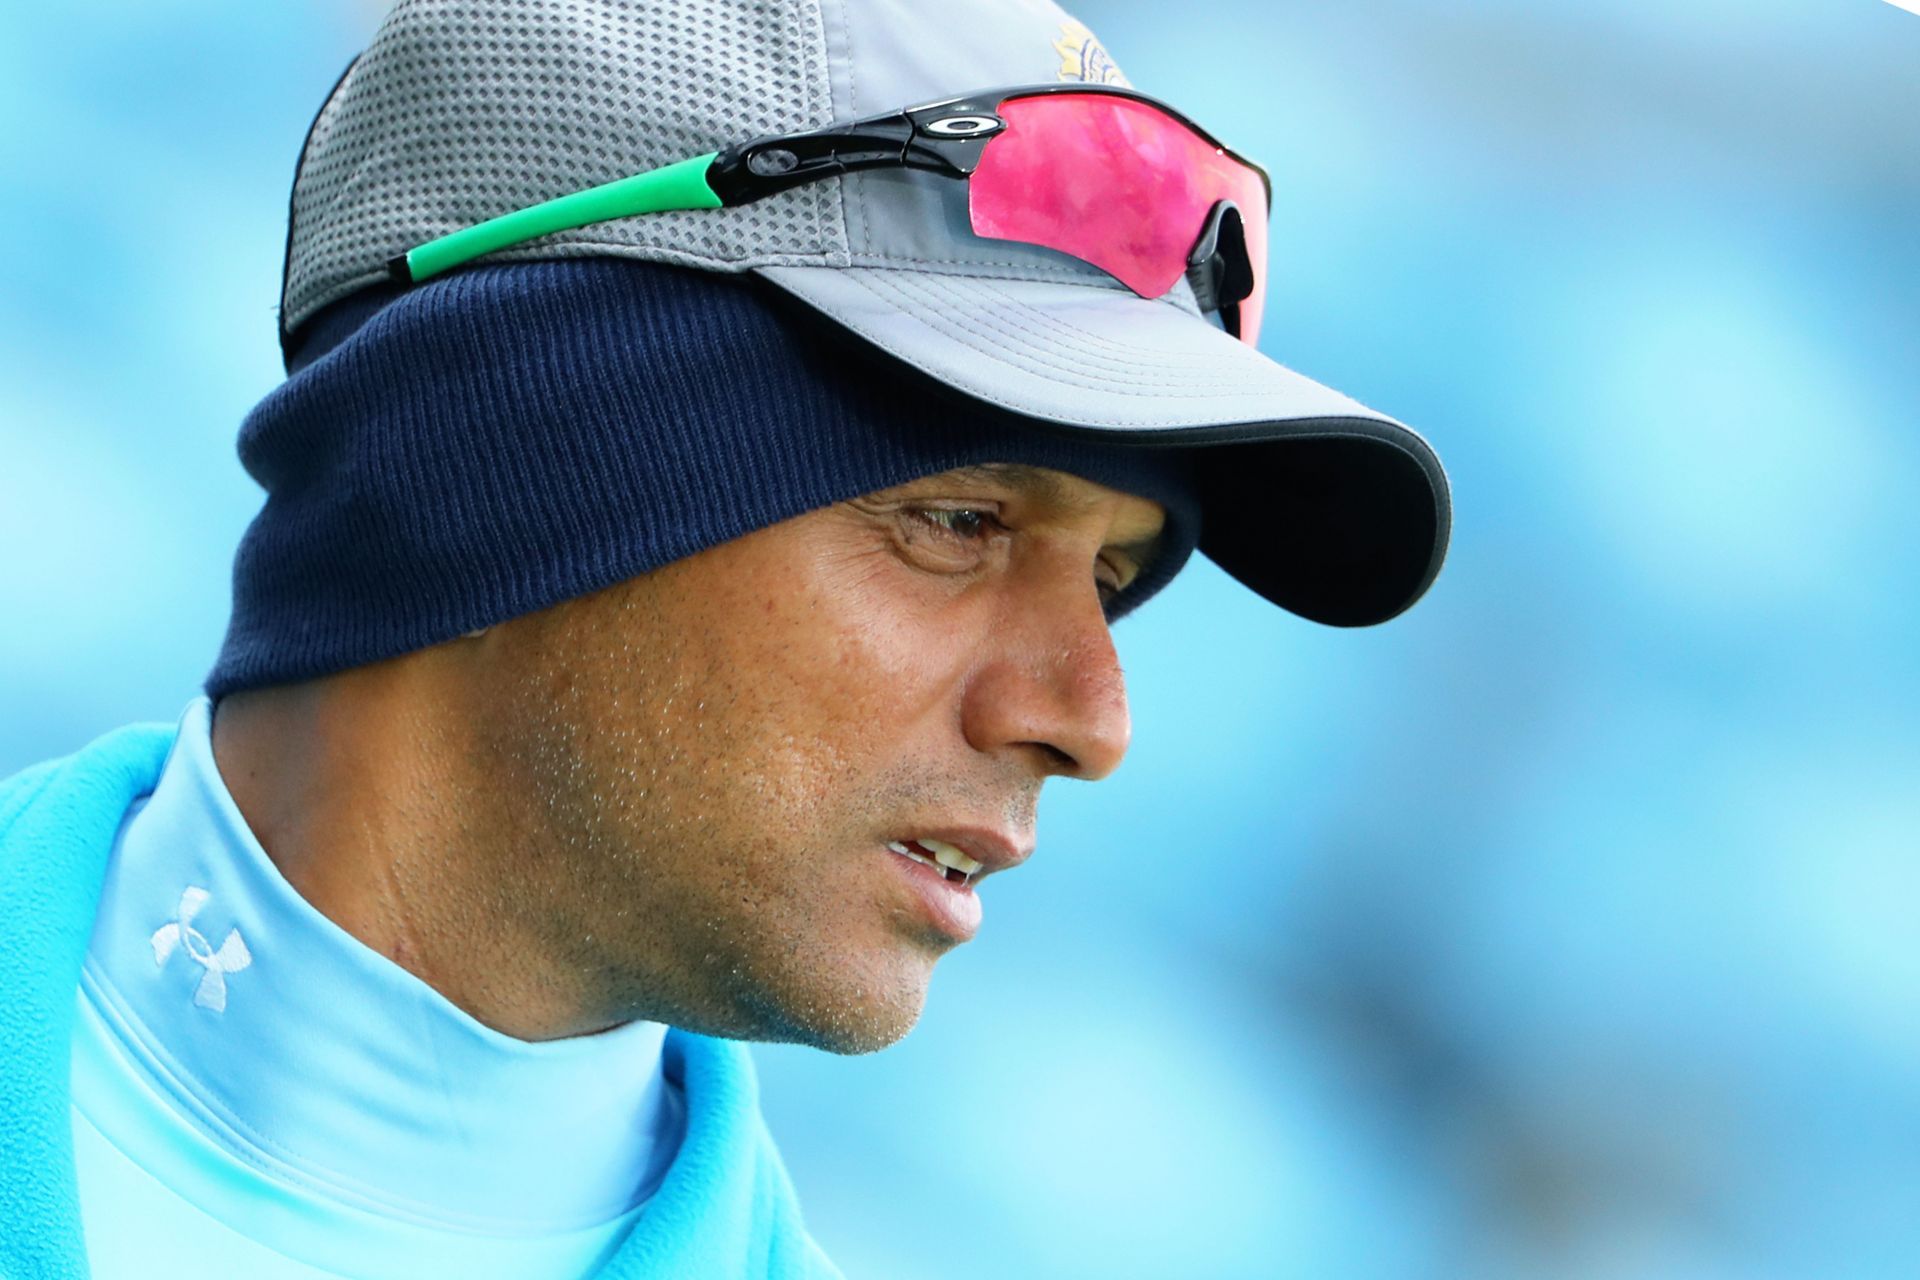 Rahul Dravid shares a good rapport with current players